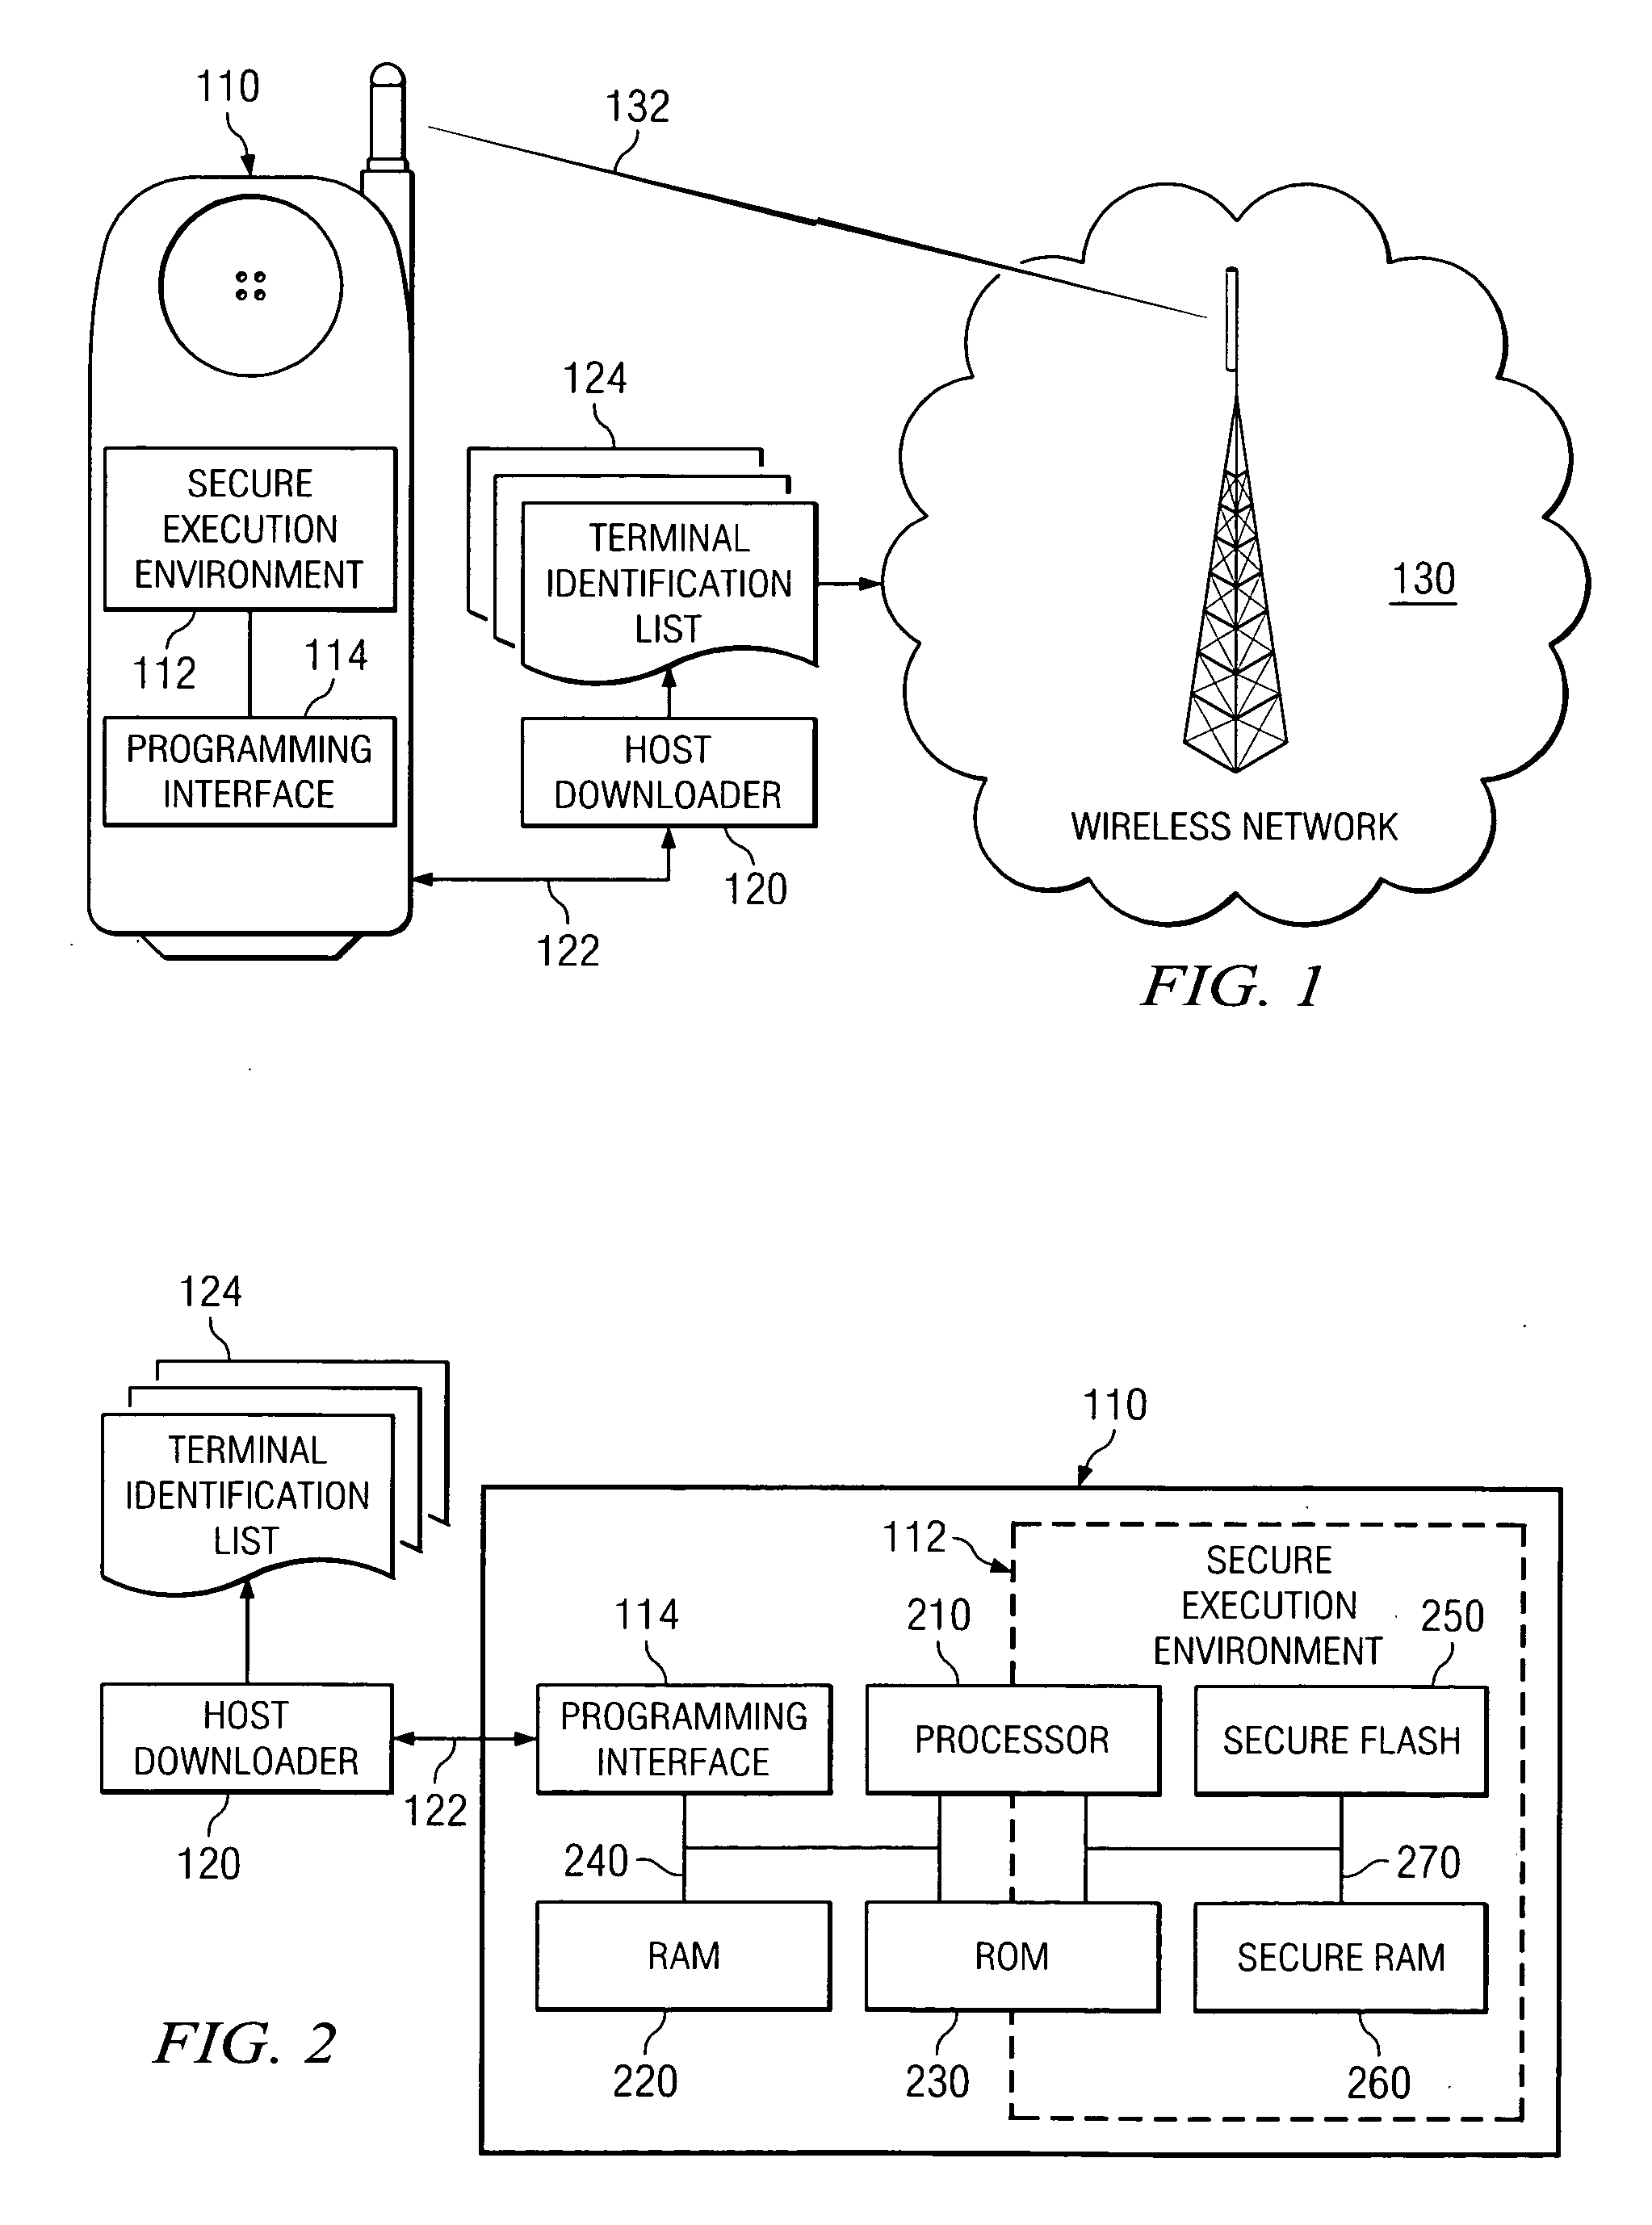 System and method for secure collaborative terminal identity authentication between a wireless communication device and a wireless operator